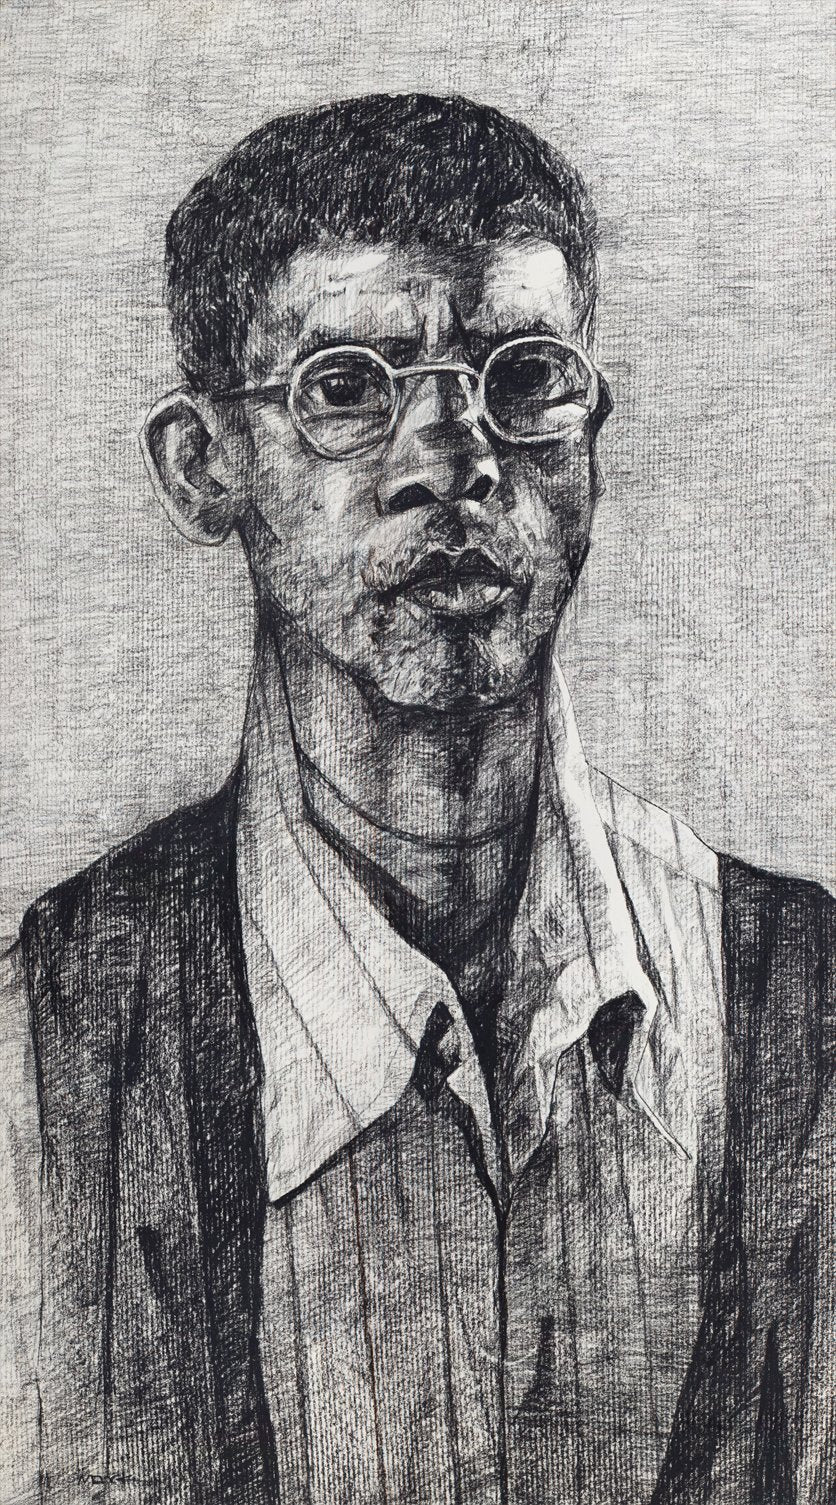 Untitled 124|S. Mark Rathinaraj- Charcoal on Board, , 39.5 x 22 inches